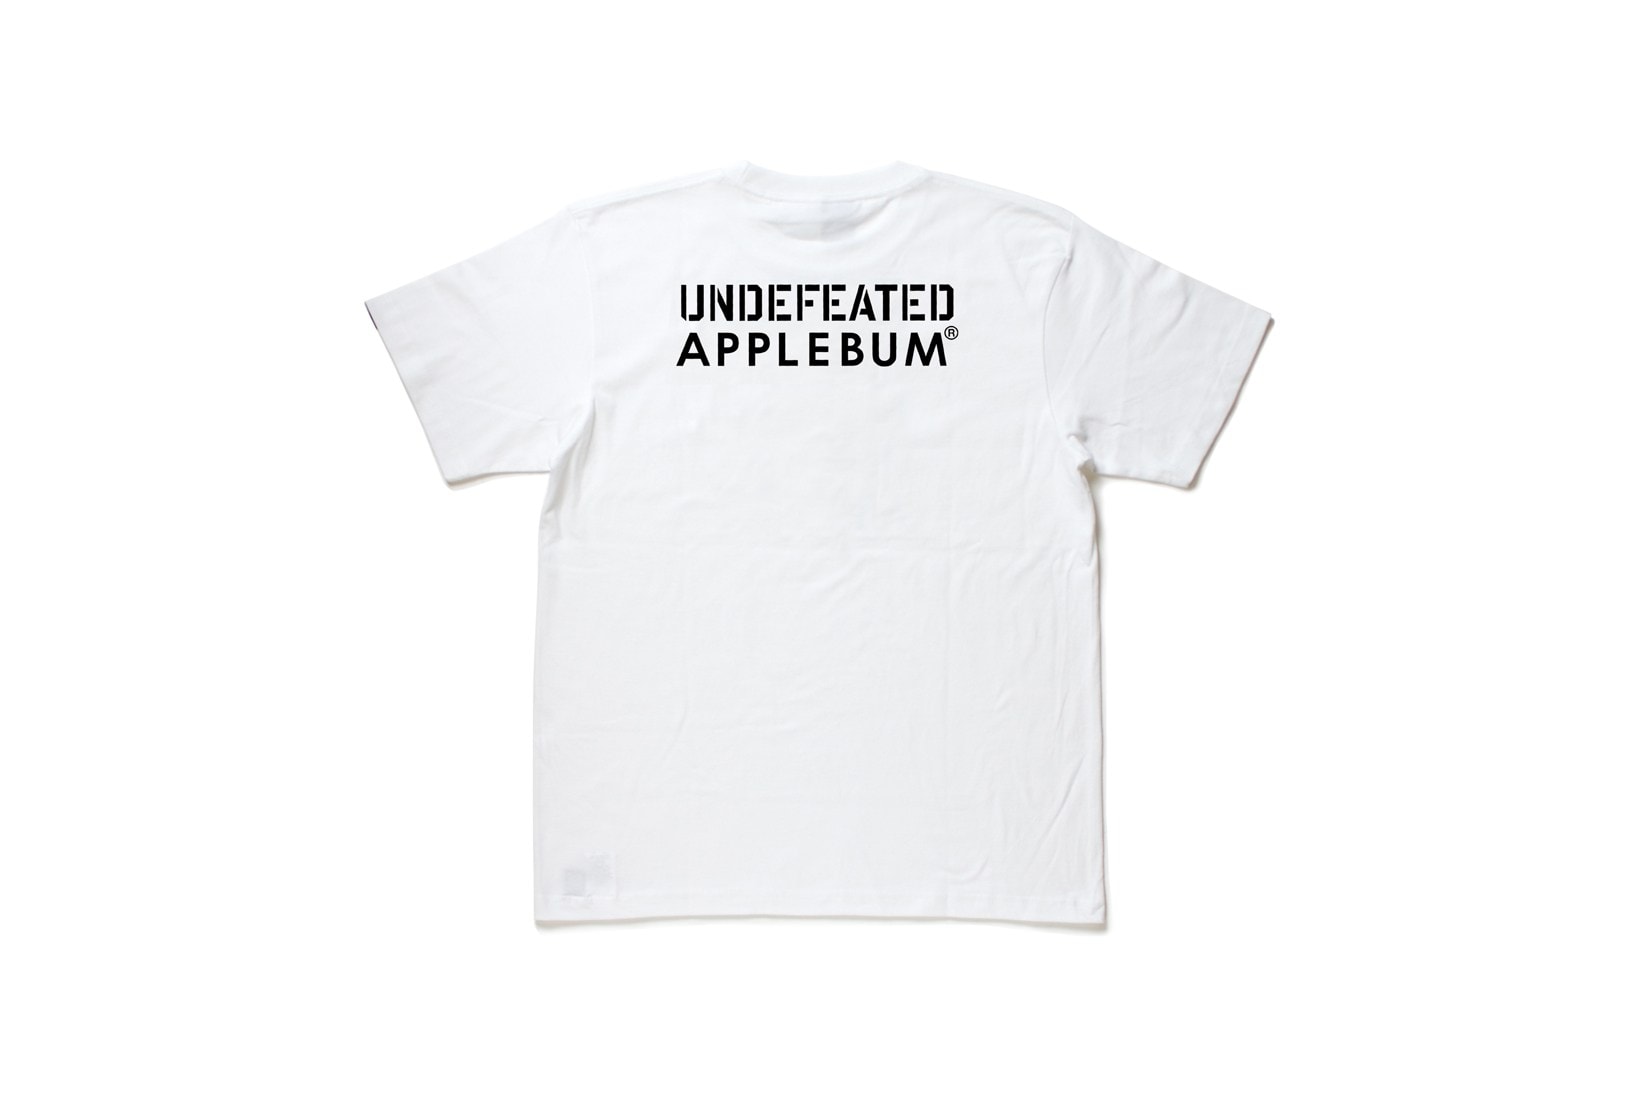 UNDEFEATED x APPLEBUM 2016 Collaboration